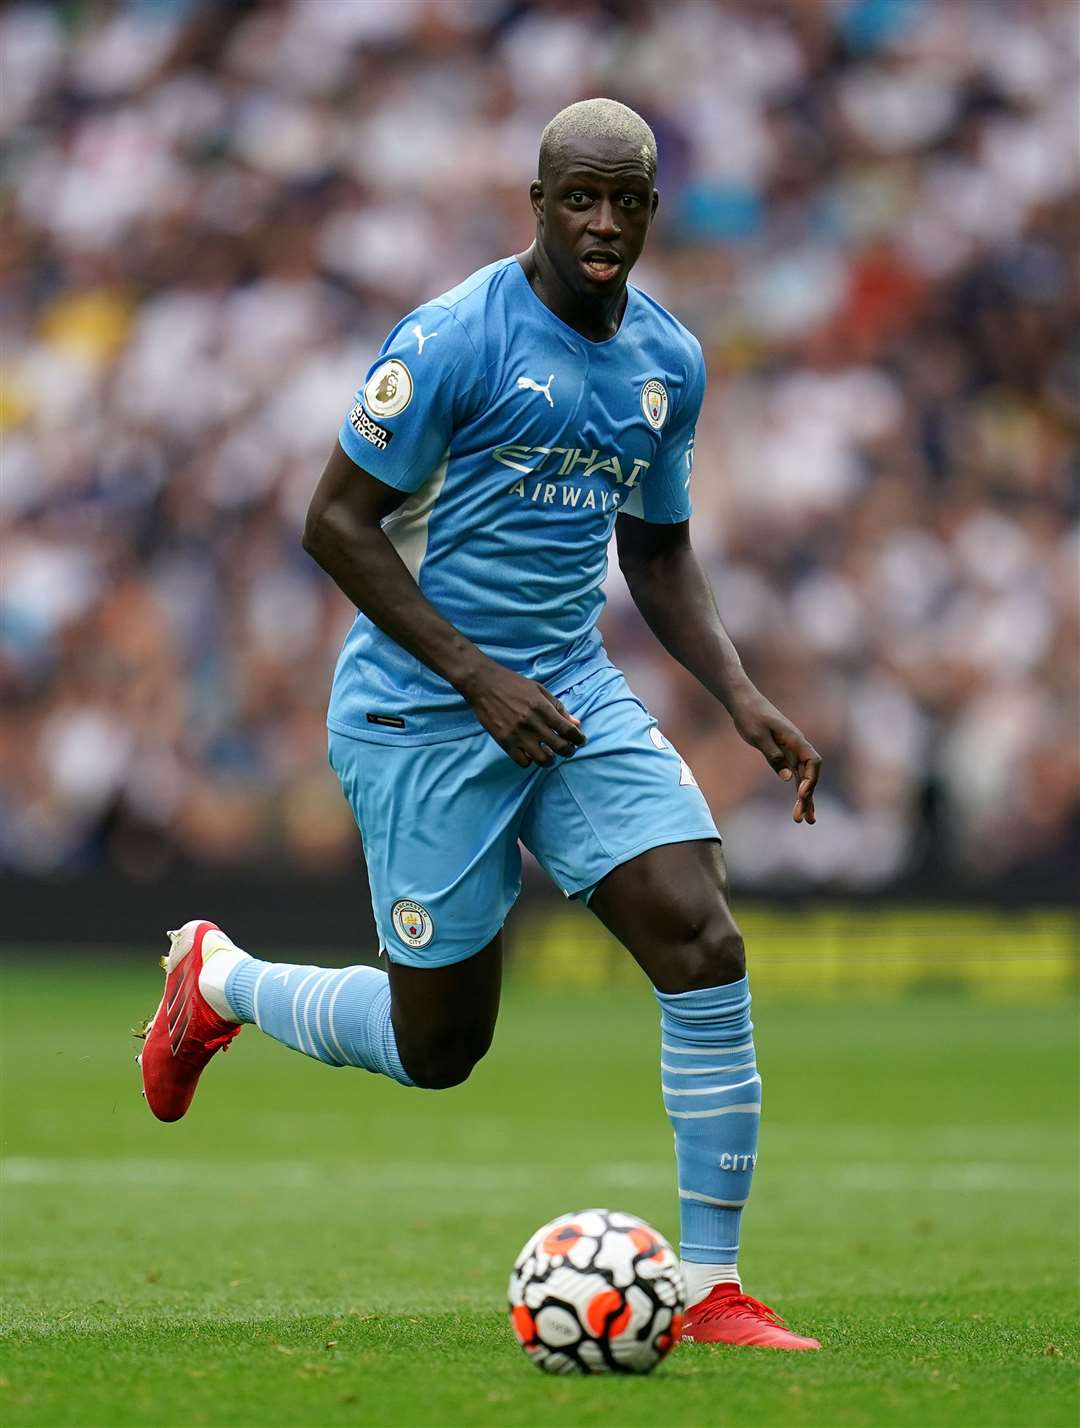 Mendy has played for Manchester City since 2017, when he joined from Monaco for a reported £52 million (PA)